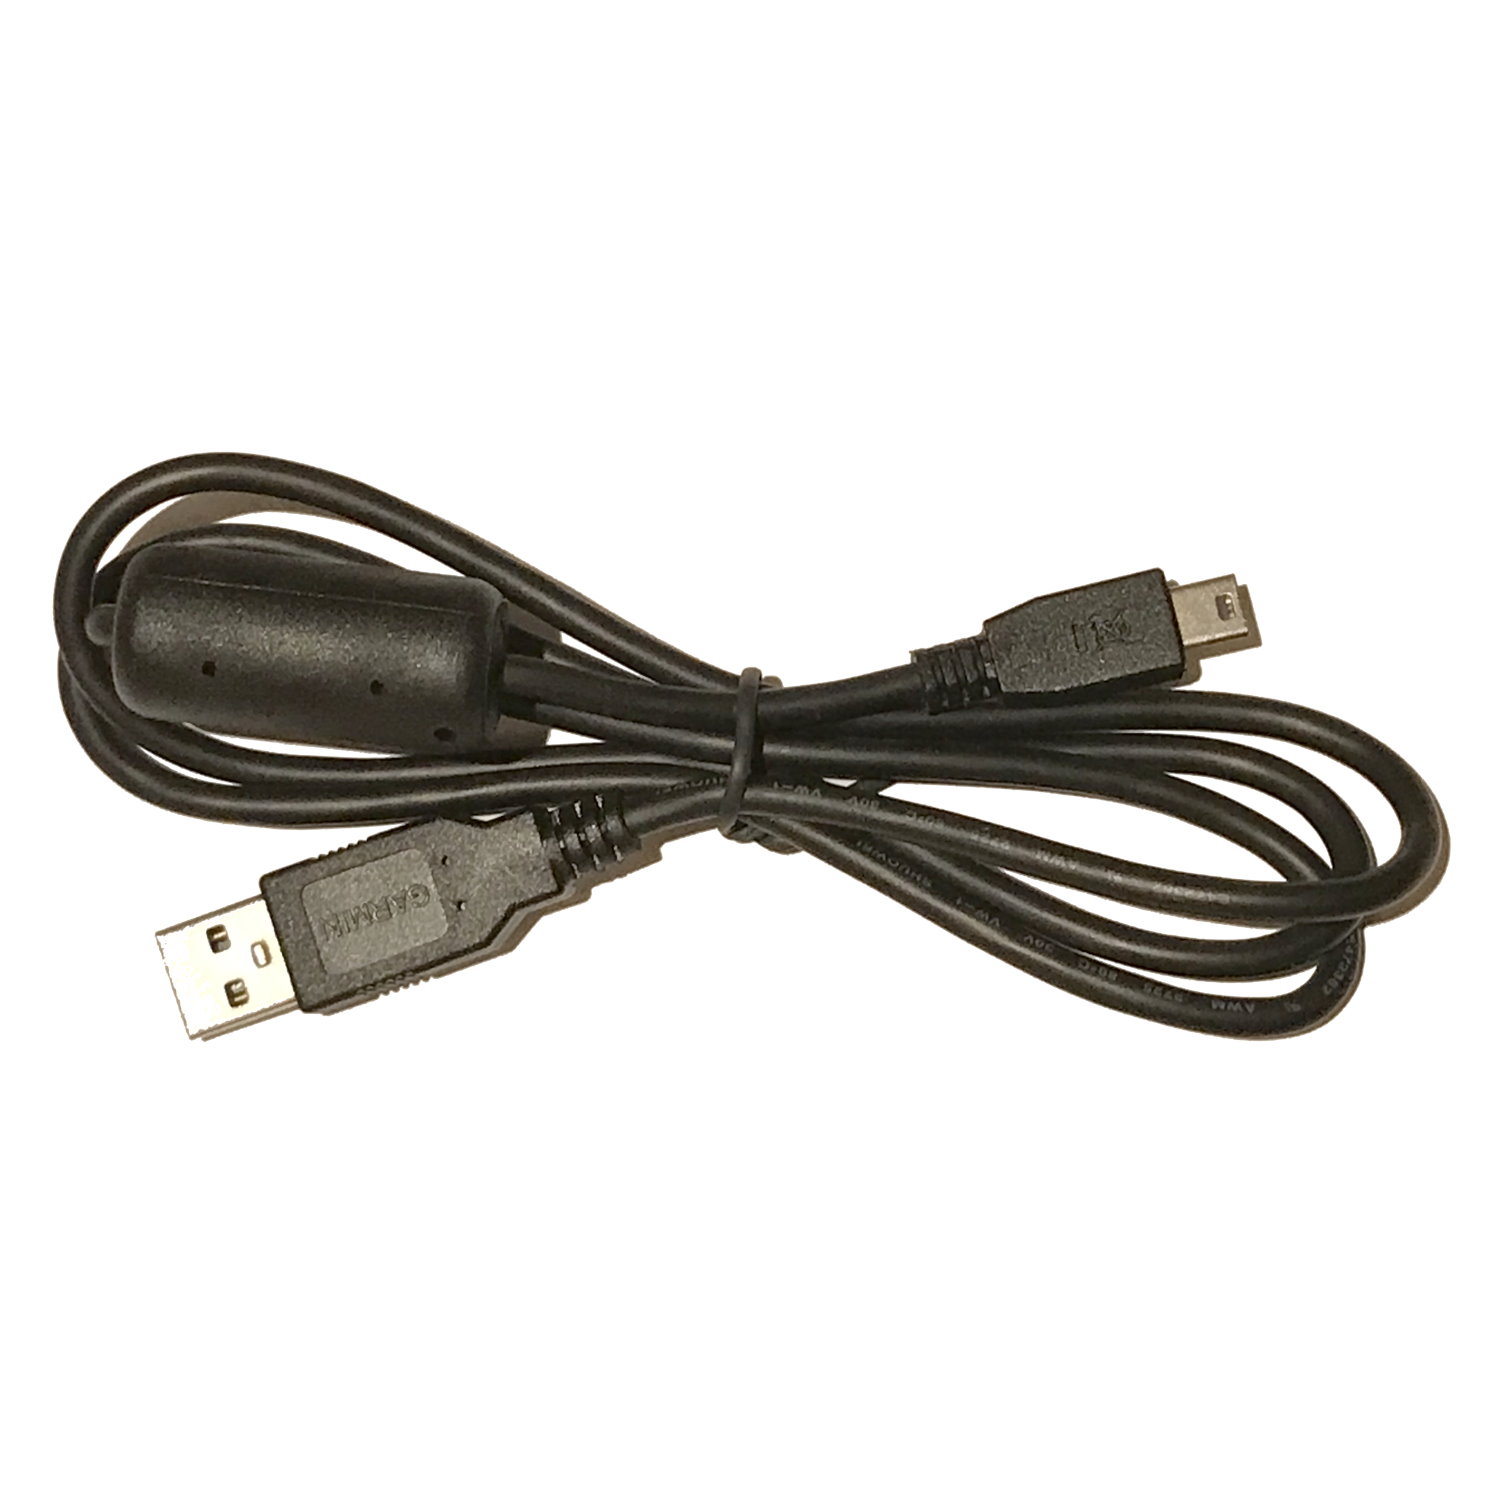 MIO TOMTOM NAVIGATIONS USB CABLE TO TRANSFER DATA FROM GARMIN,NAVMAN 